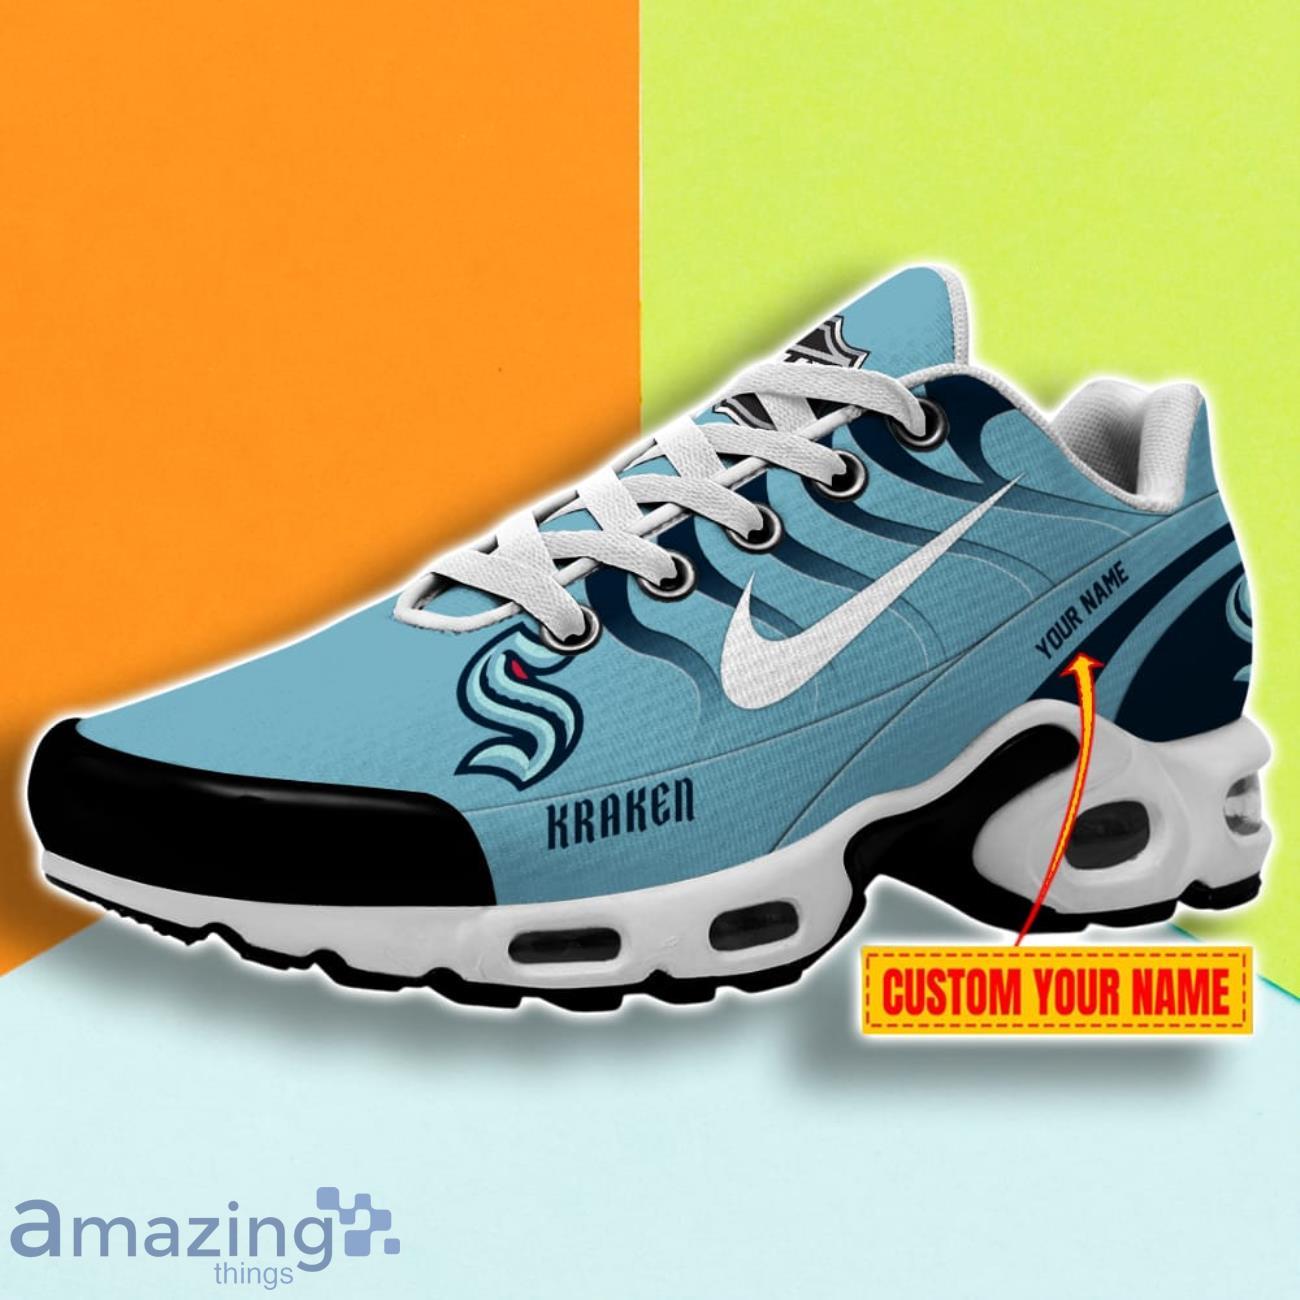 Seattle Kraken NHL TN Sport Shoes Custom Name Enthusiastic Support From Fans Product Photo 1